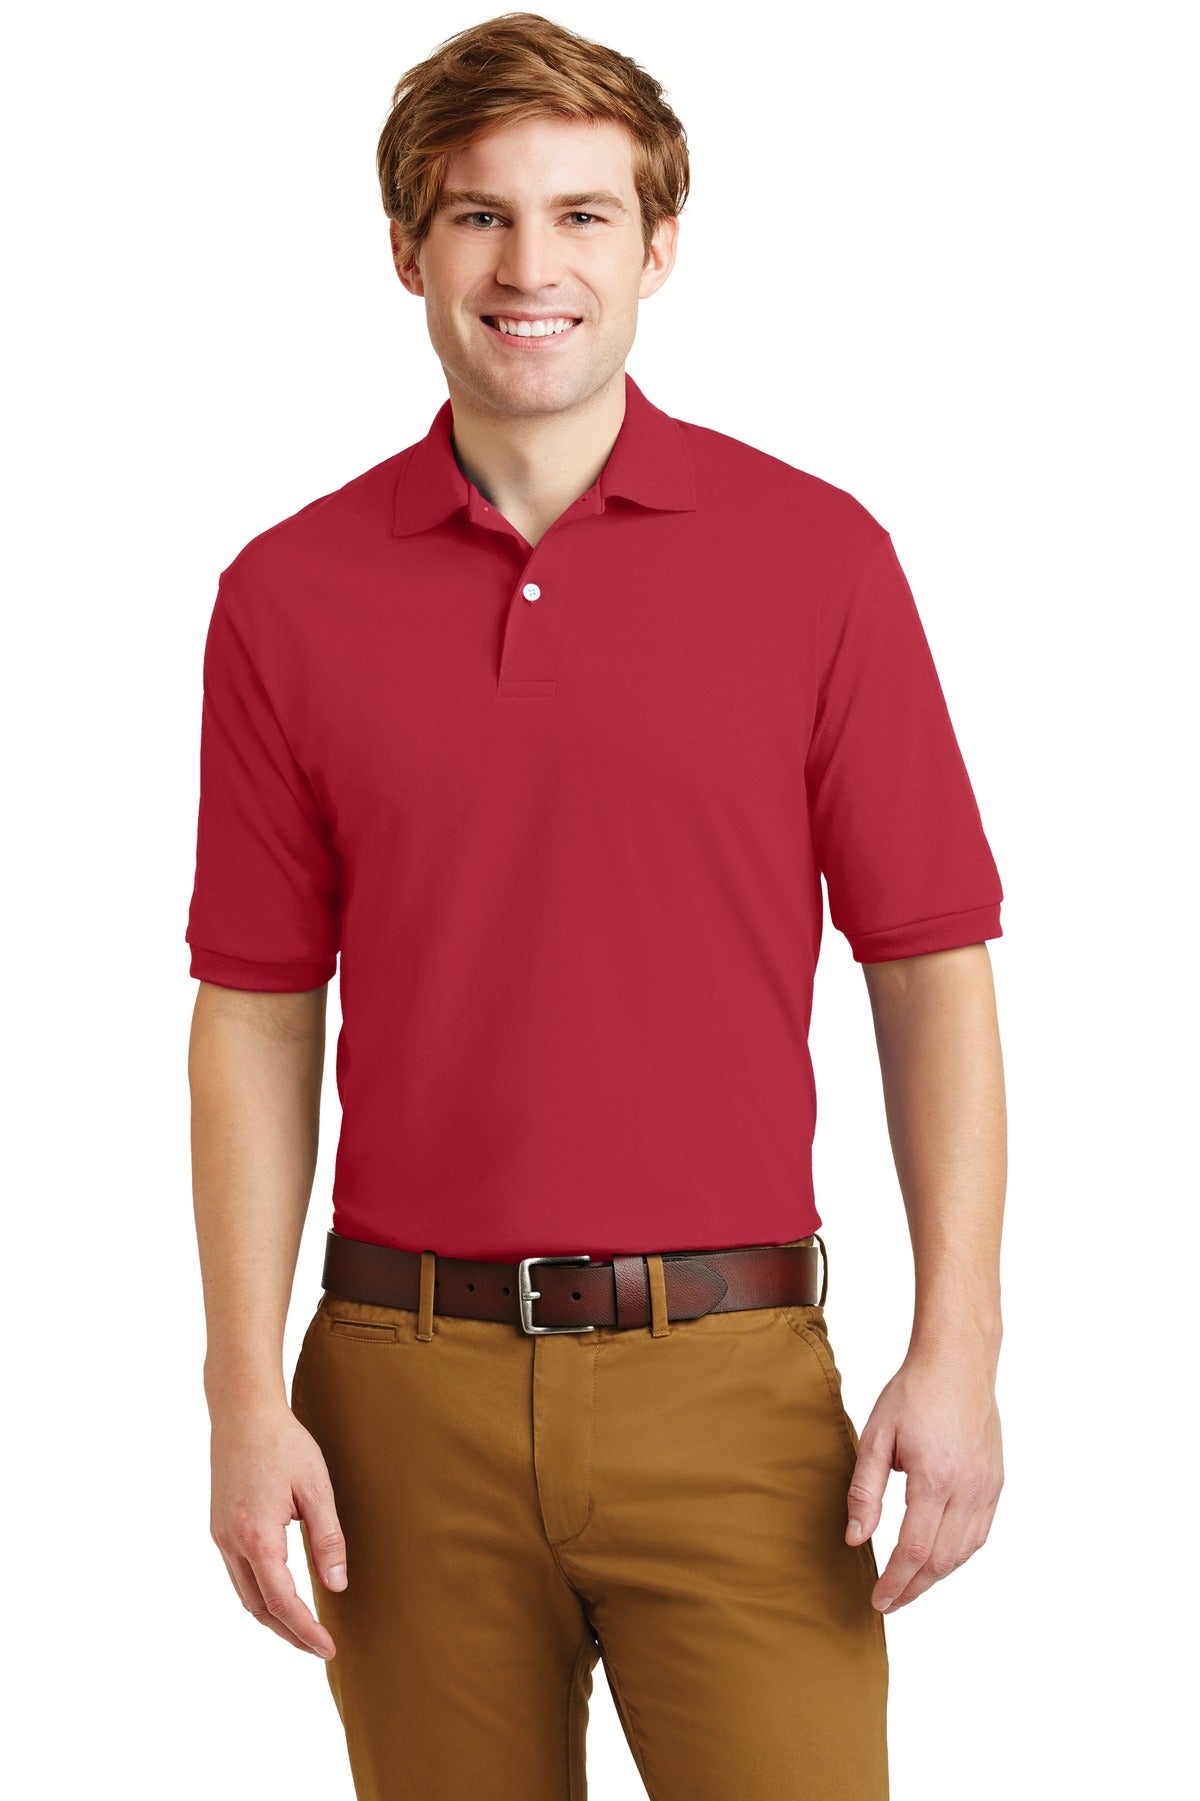 Polos/Knits True Red Jerzees